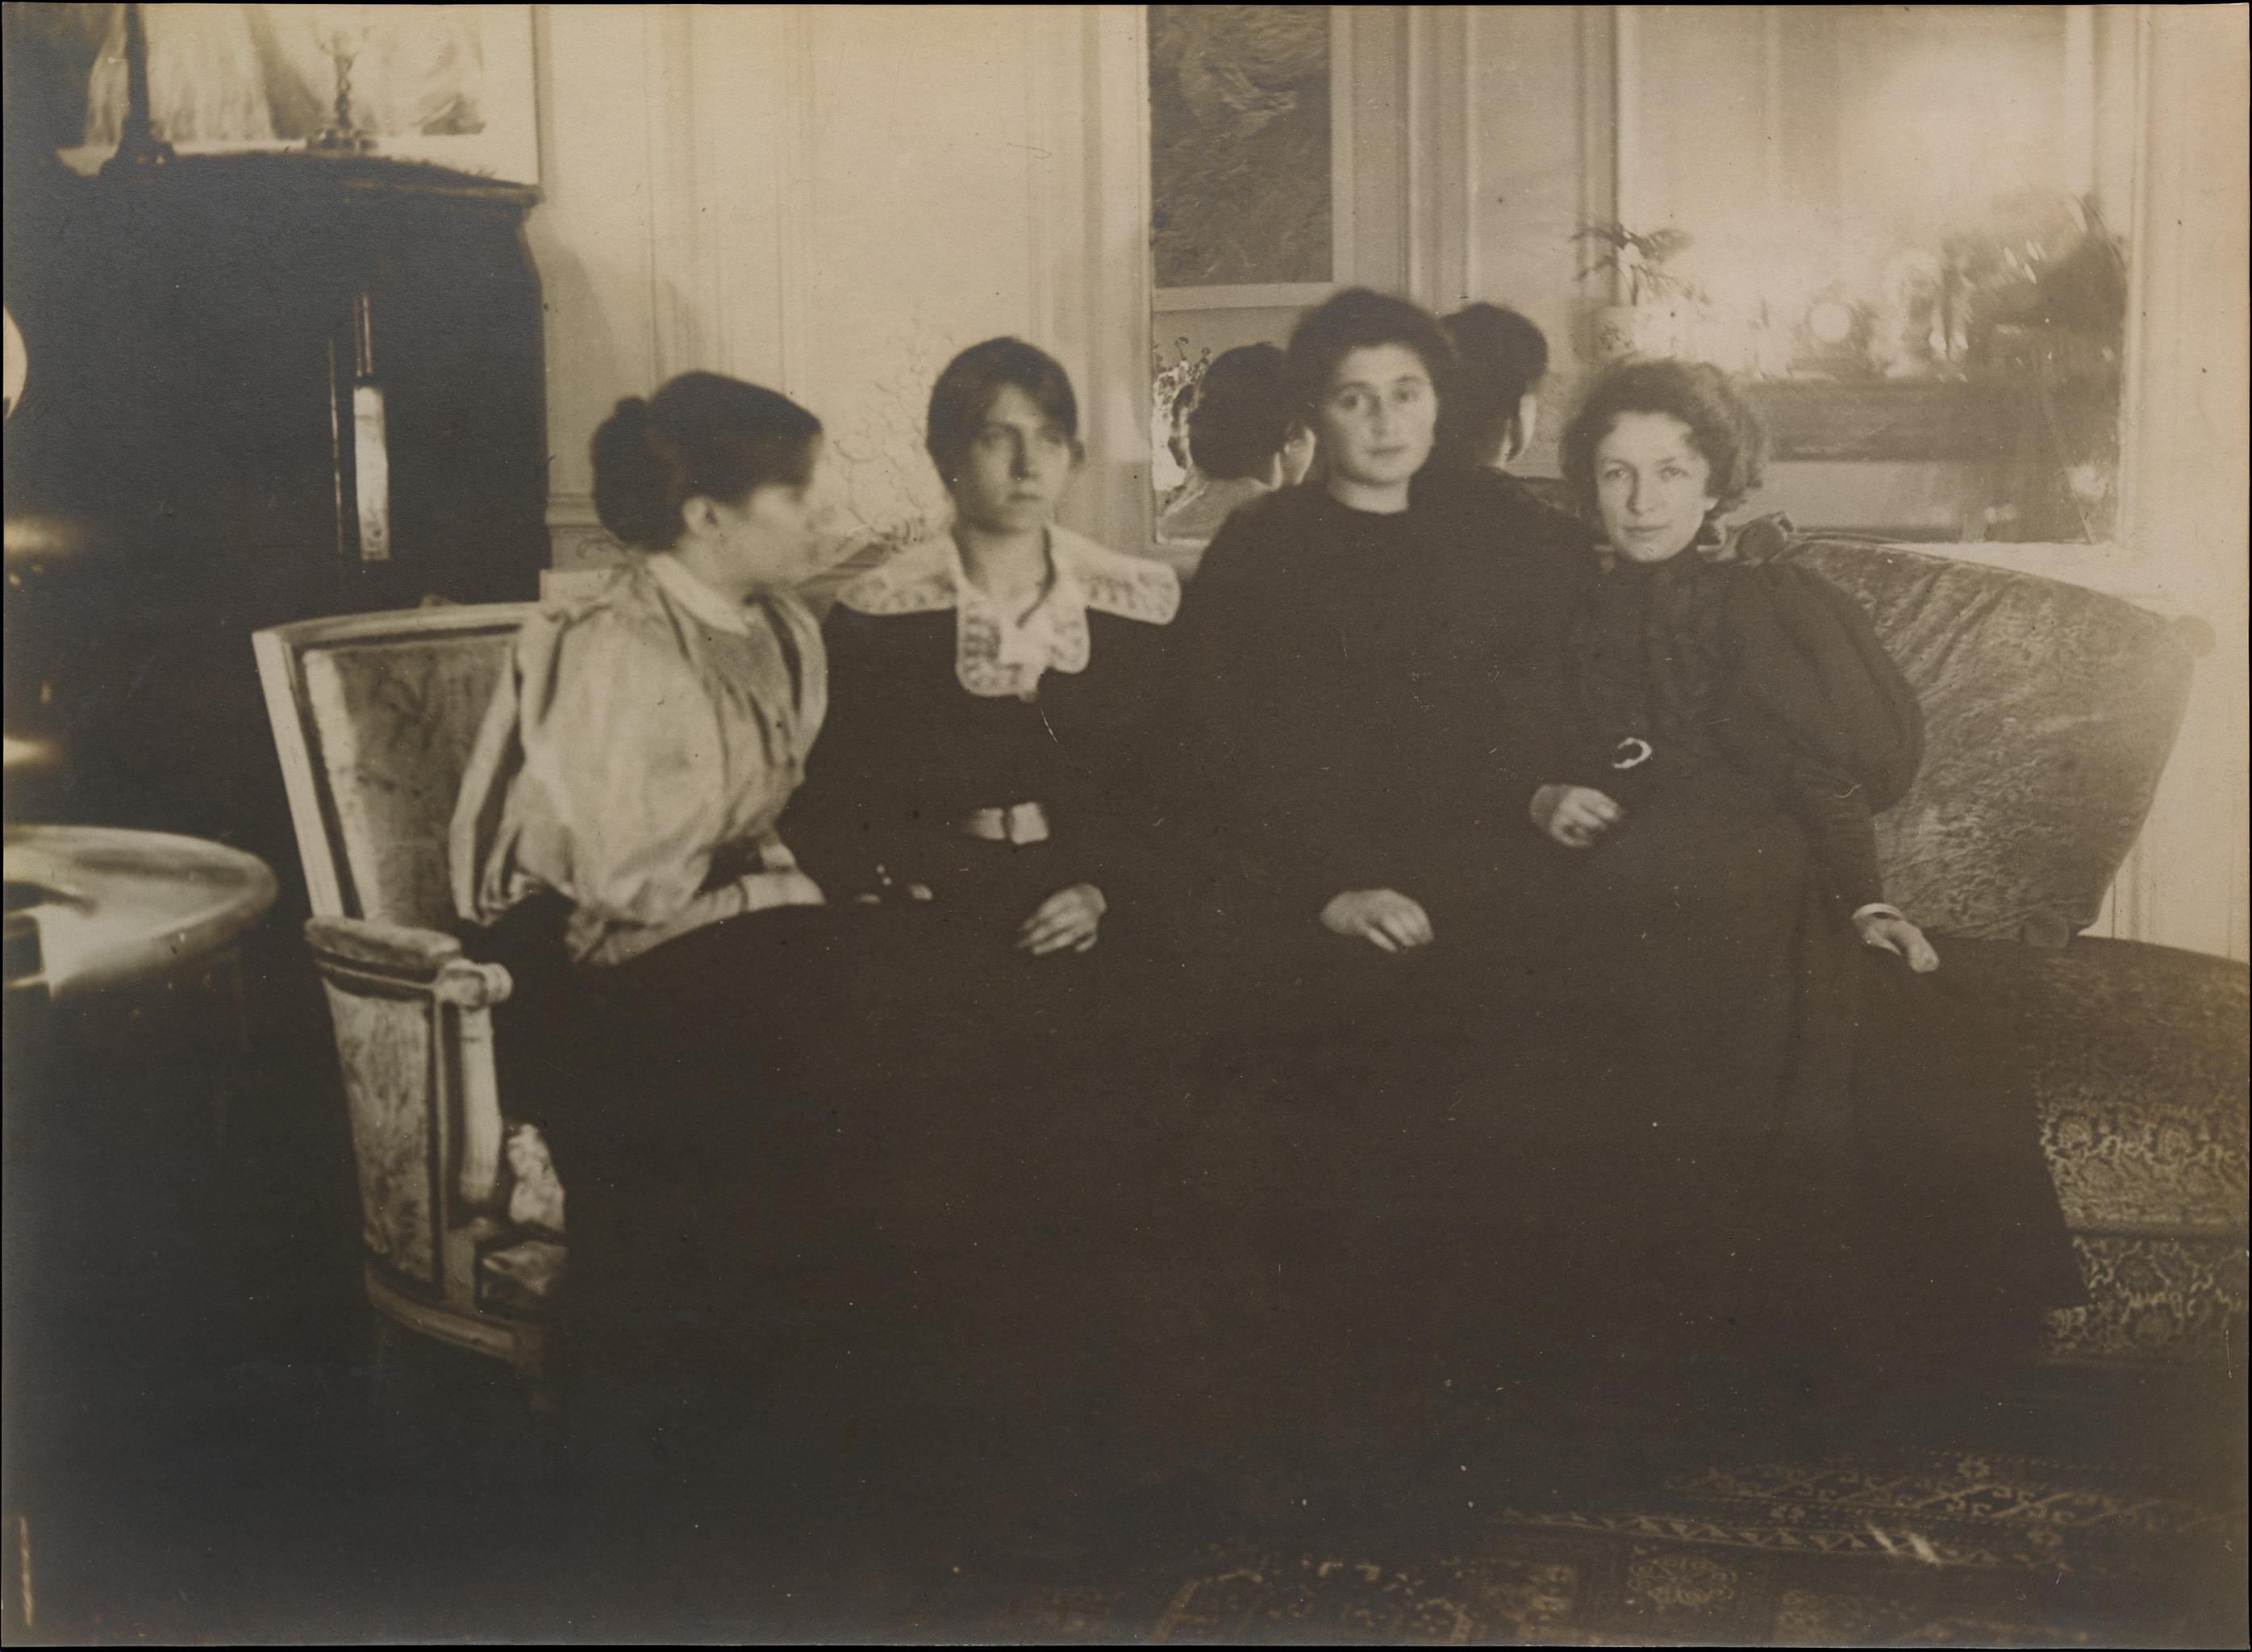 A black and white photography of four women wearing black or dark dresses sitting together on a coach. The background consists of a mirror on the wall and a cabinet to the left.